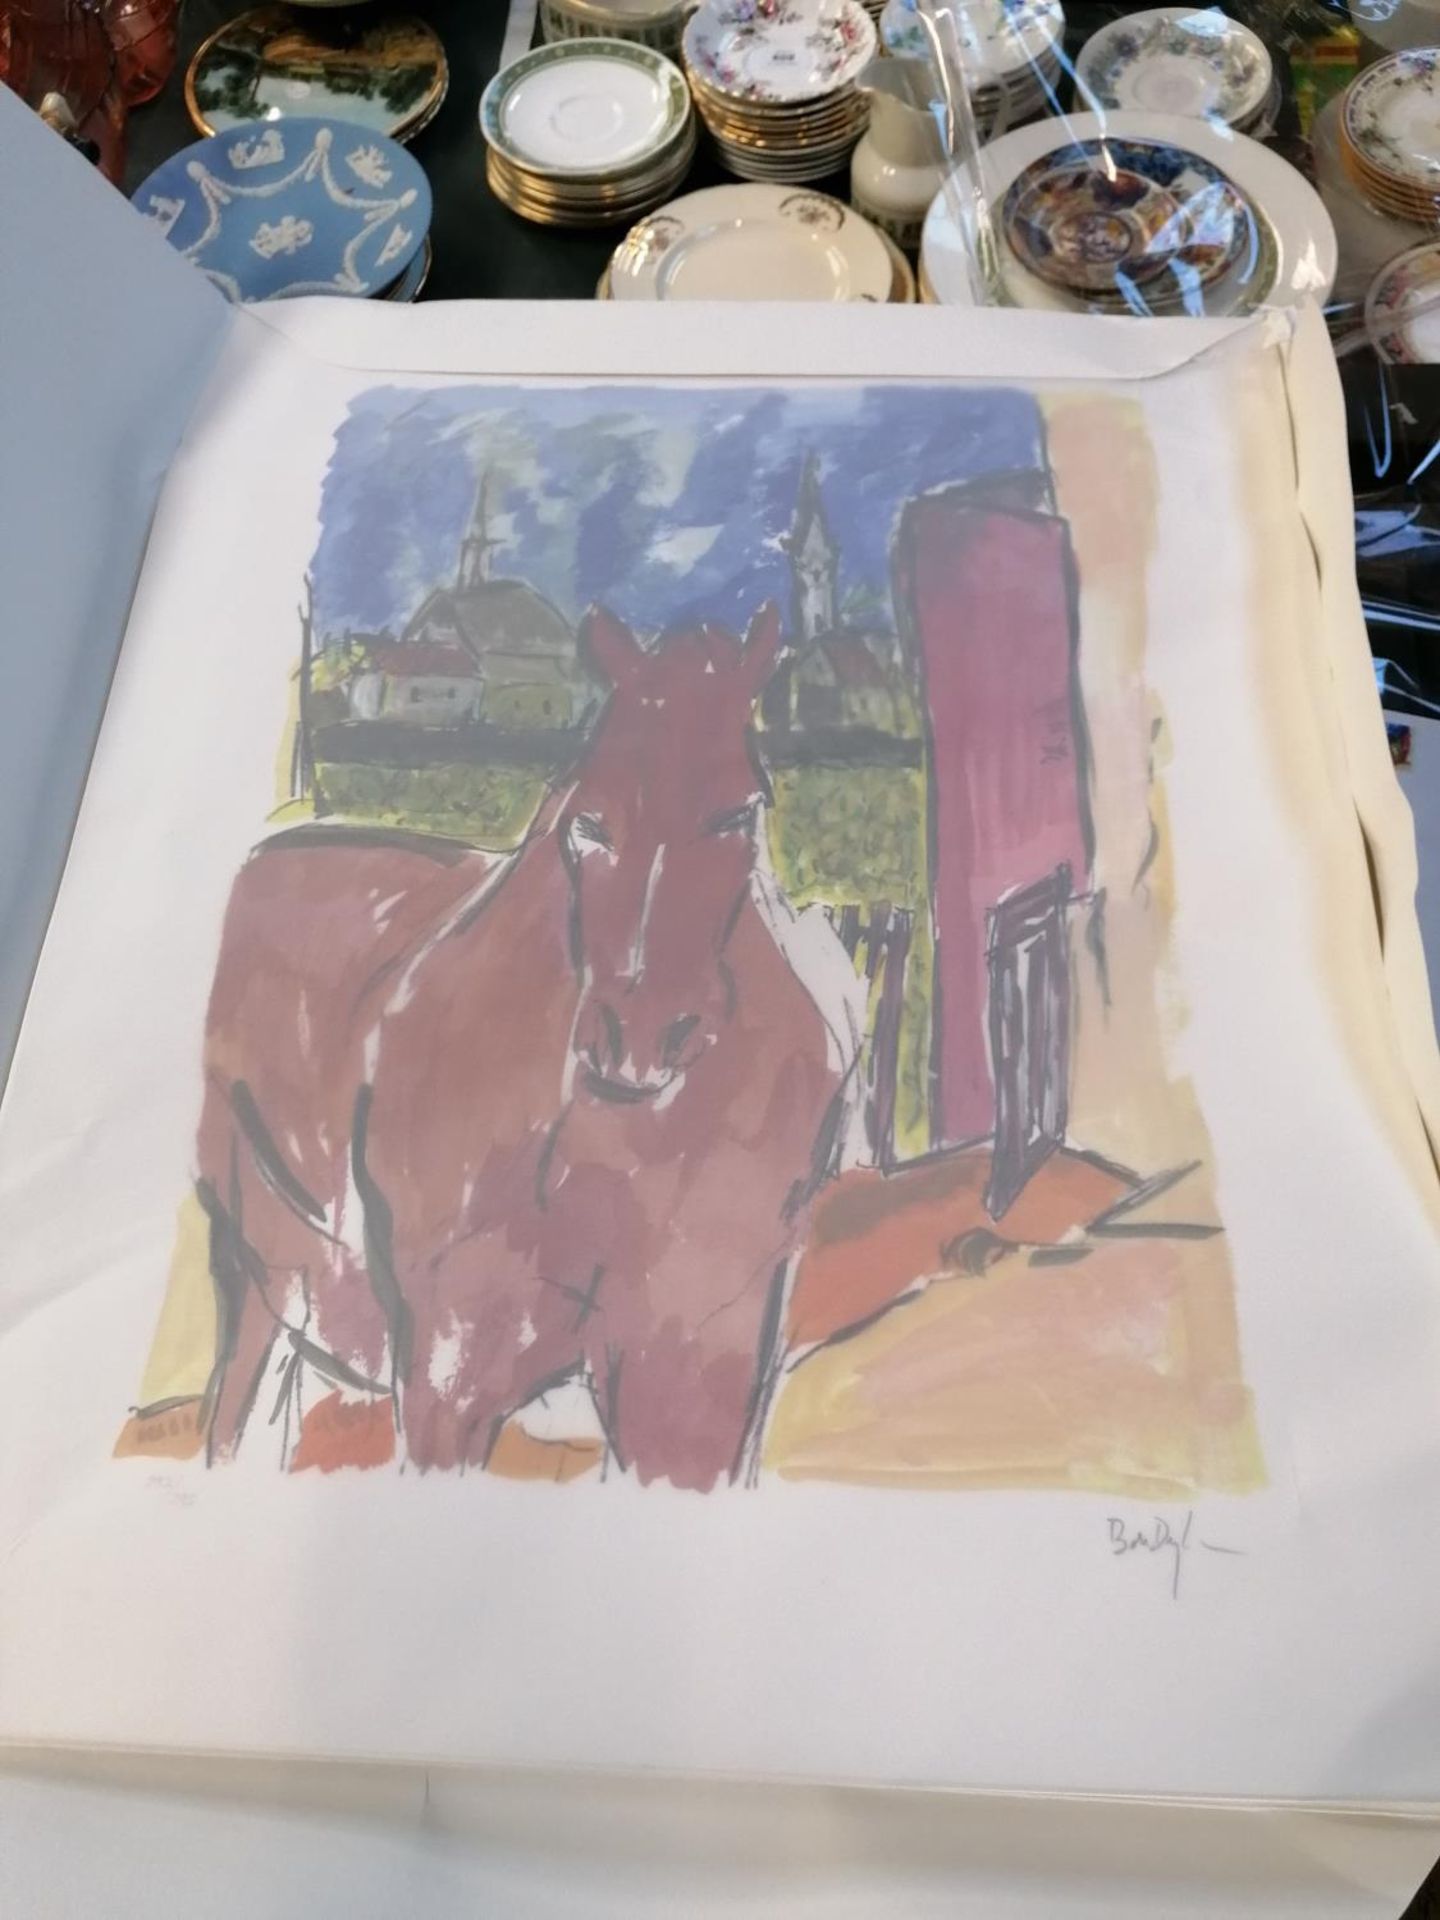 A BOB DYLAN PENCIL SIGNED LIMITED EDITION PRINT - 'HORSE' (2010) FROM THE DRAWN BLANK SERIES, UNFRAM